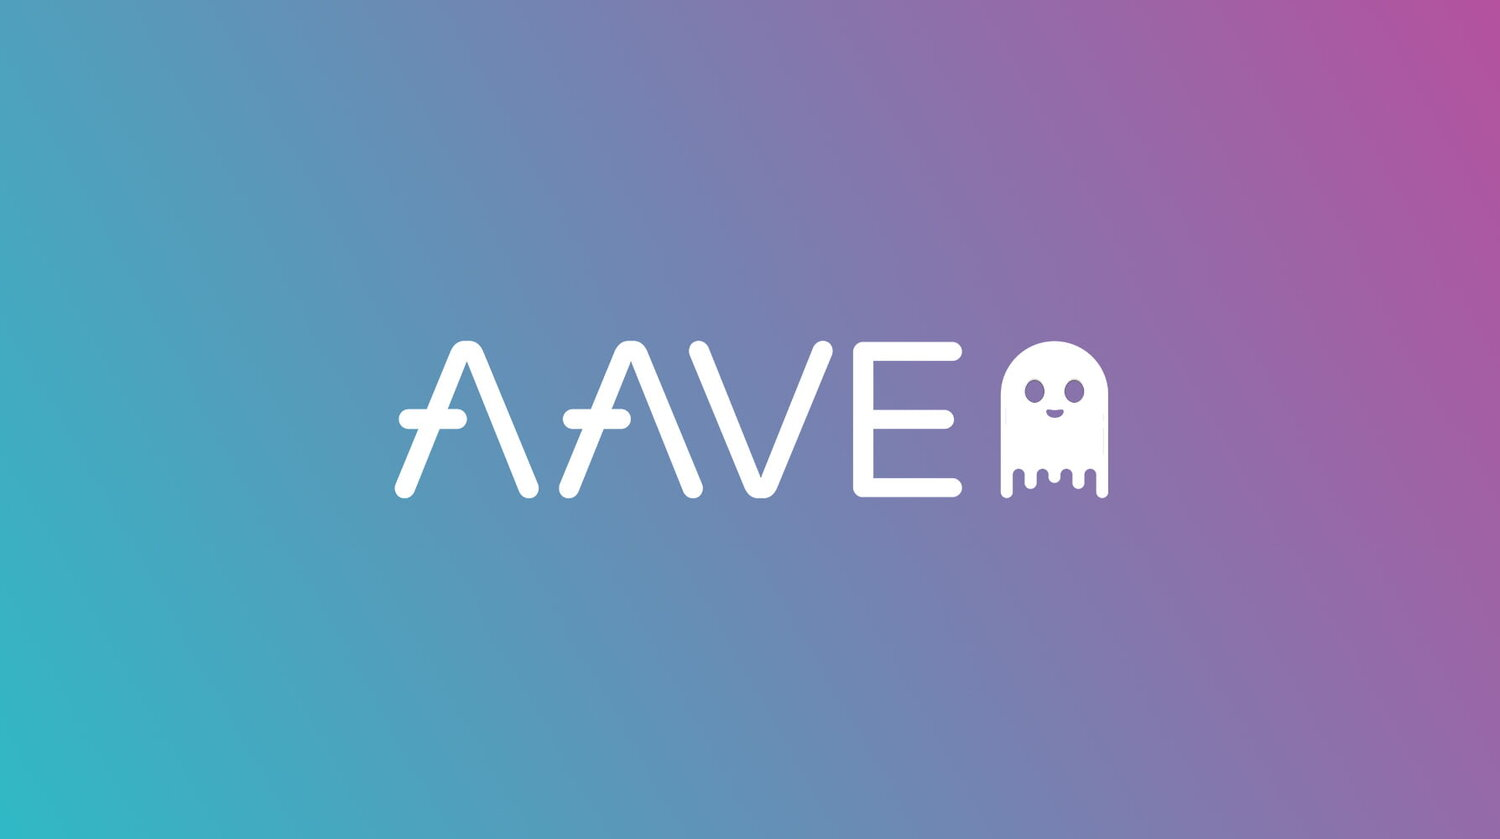 Aave - One of the most popular crypto lending platforms in the Web3 realm.